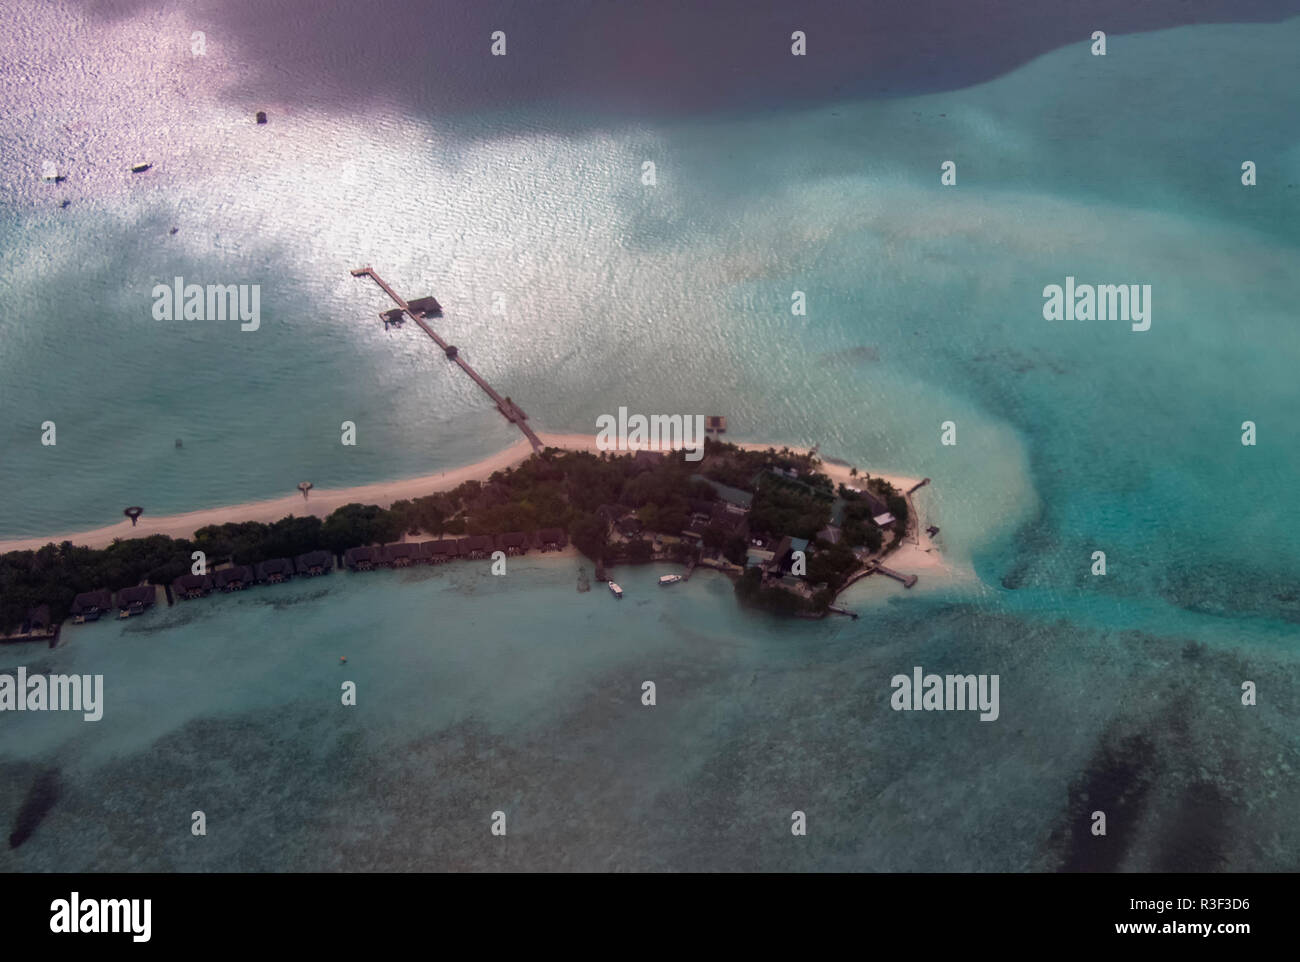 An aerial view of the Maldives in the Indian Ocean Stock Photo